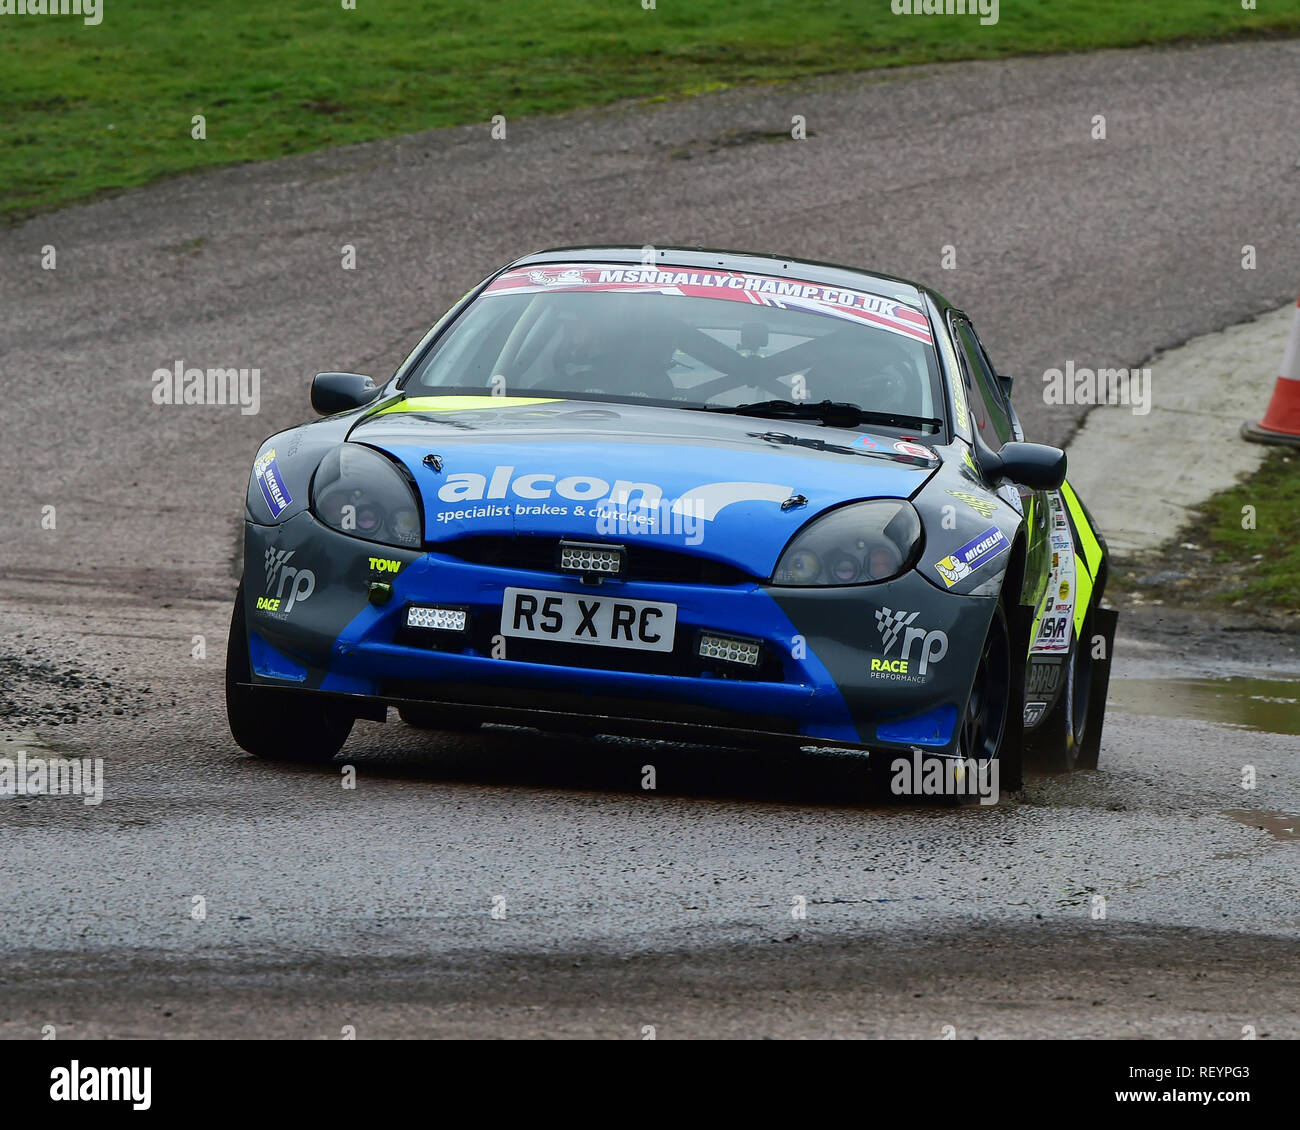 Ryan Connolly, Christopher Allen, Ford Puma, MGJ Rally Étapes, Chelmsford Motor Club, Brands Hatch, samedi 19 janvier 2019, MSV, Rallye circuit C Banque D'Images